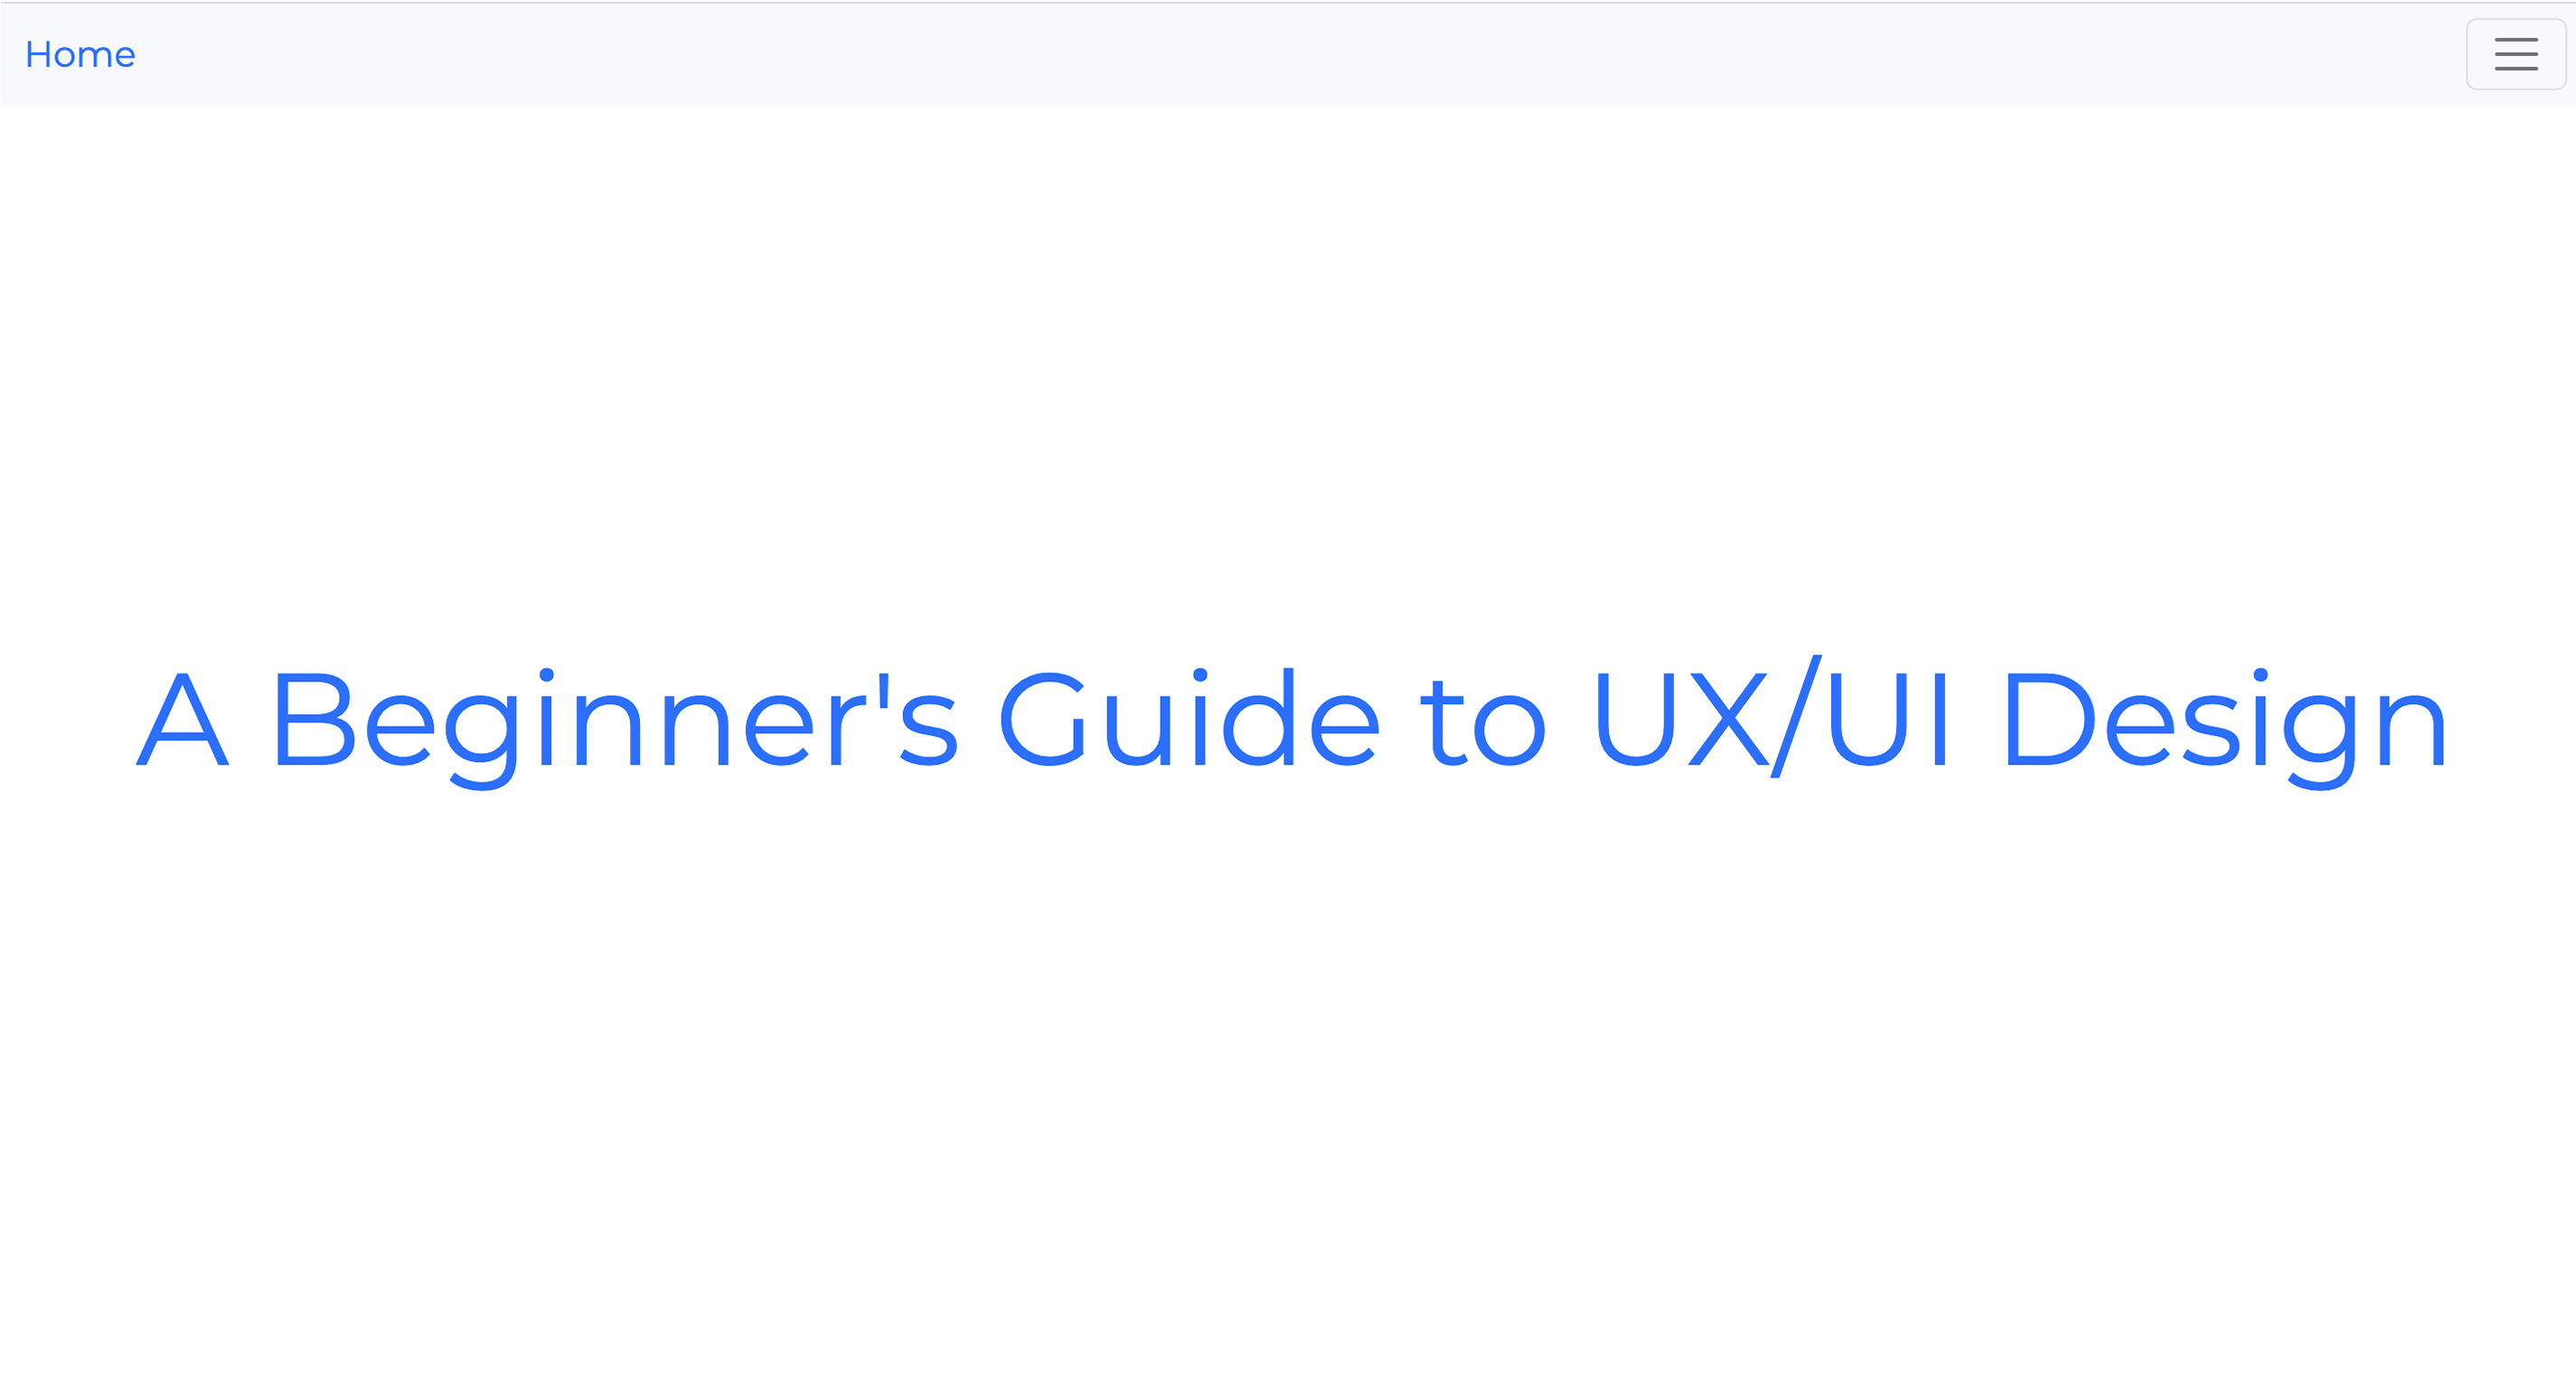 Click here for A Beginner's Guide to UX/UI Design